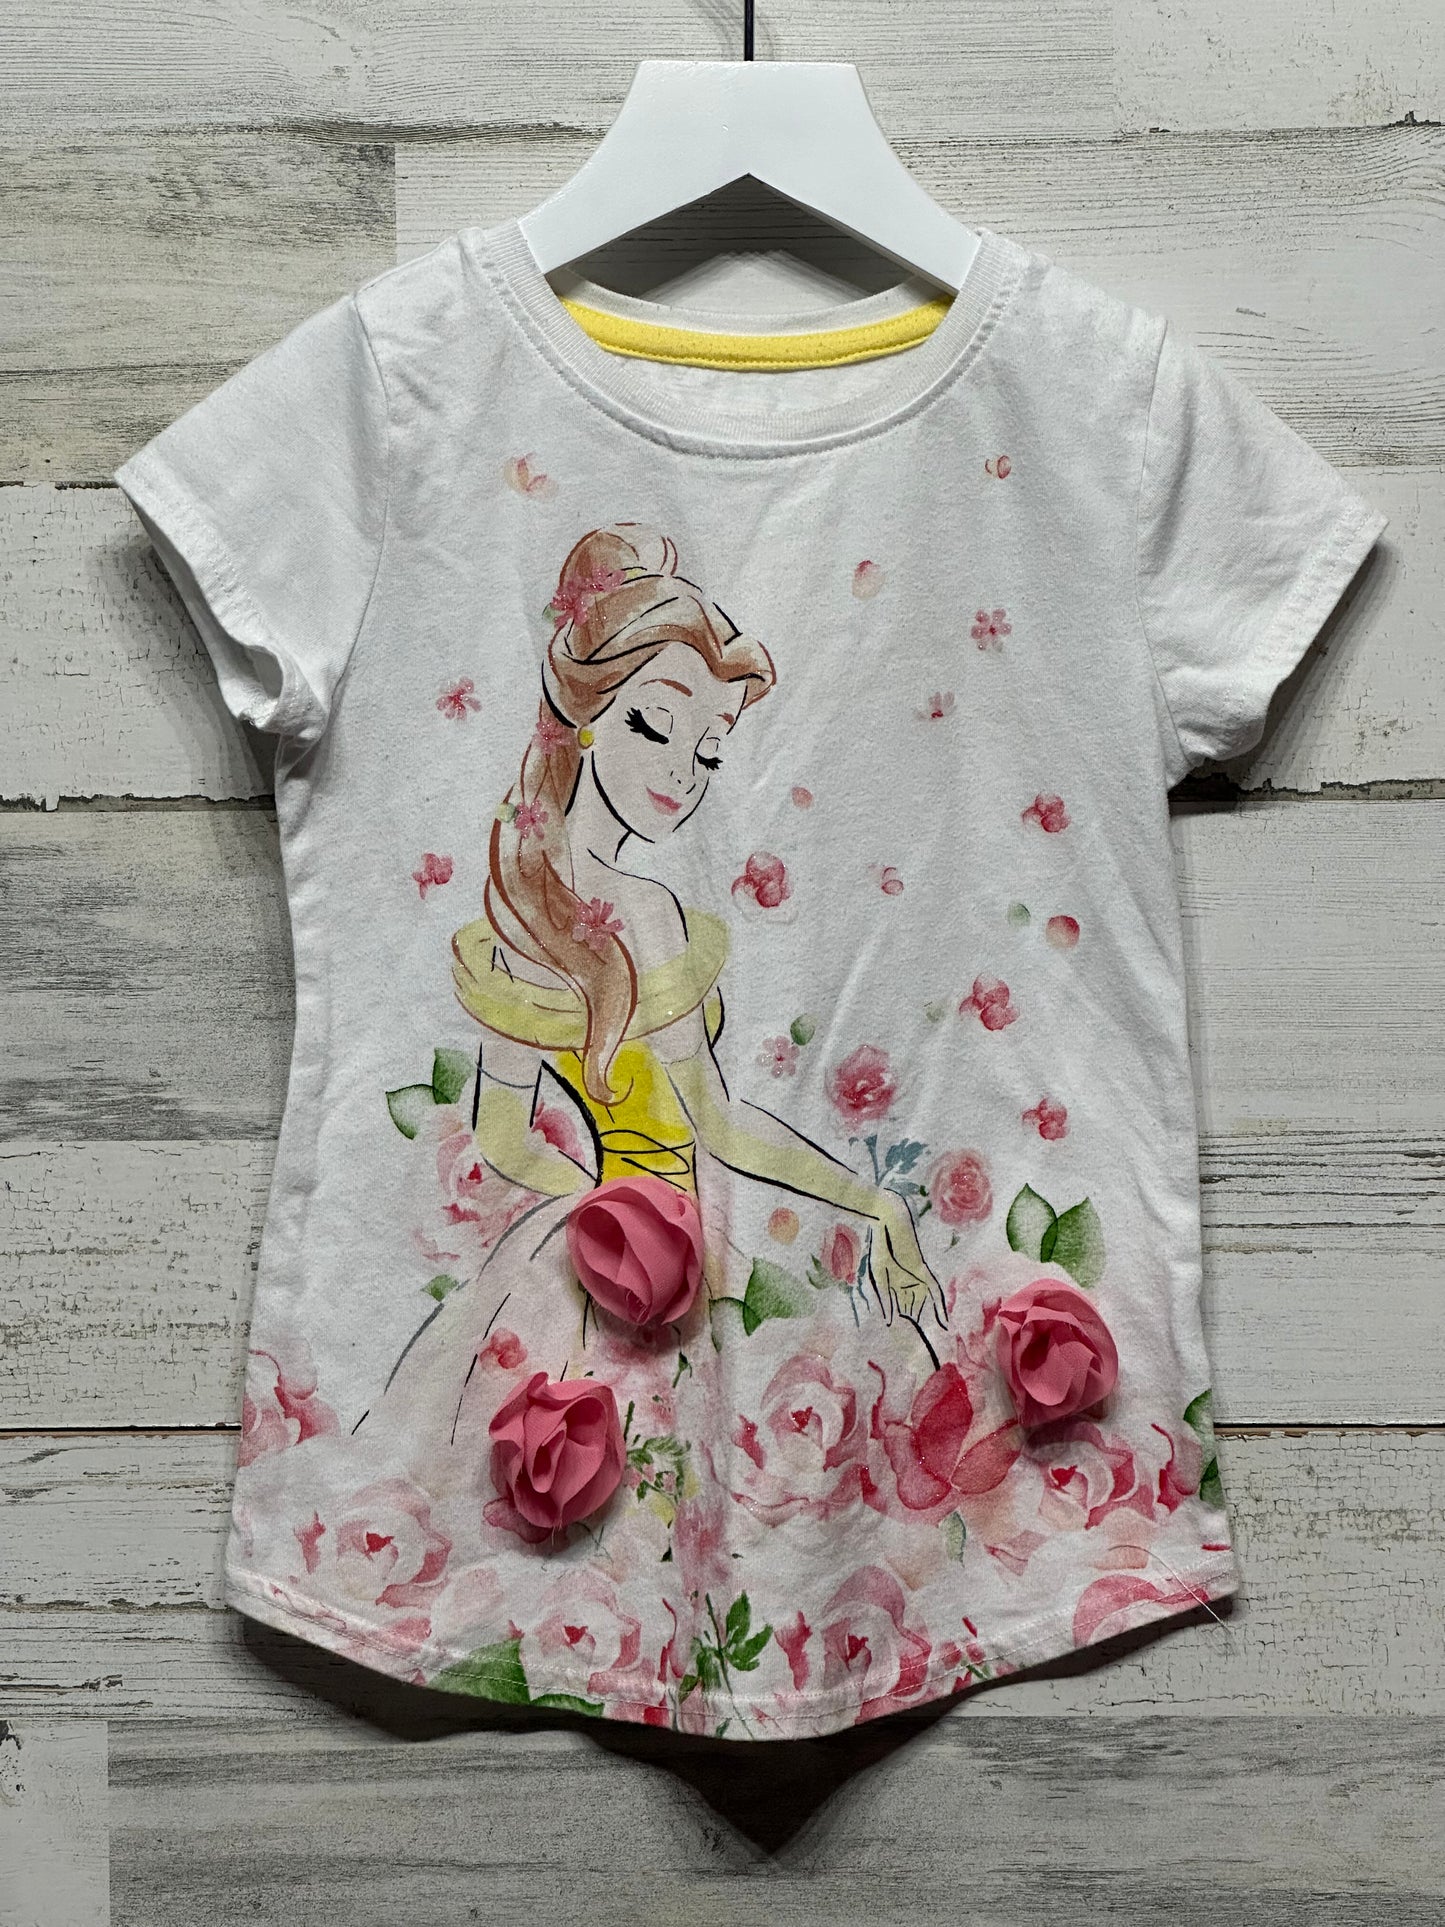 Girls Size 6/6x Disney Princess - Beauty and the Beast - Belle Shirt - Play Condition